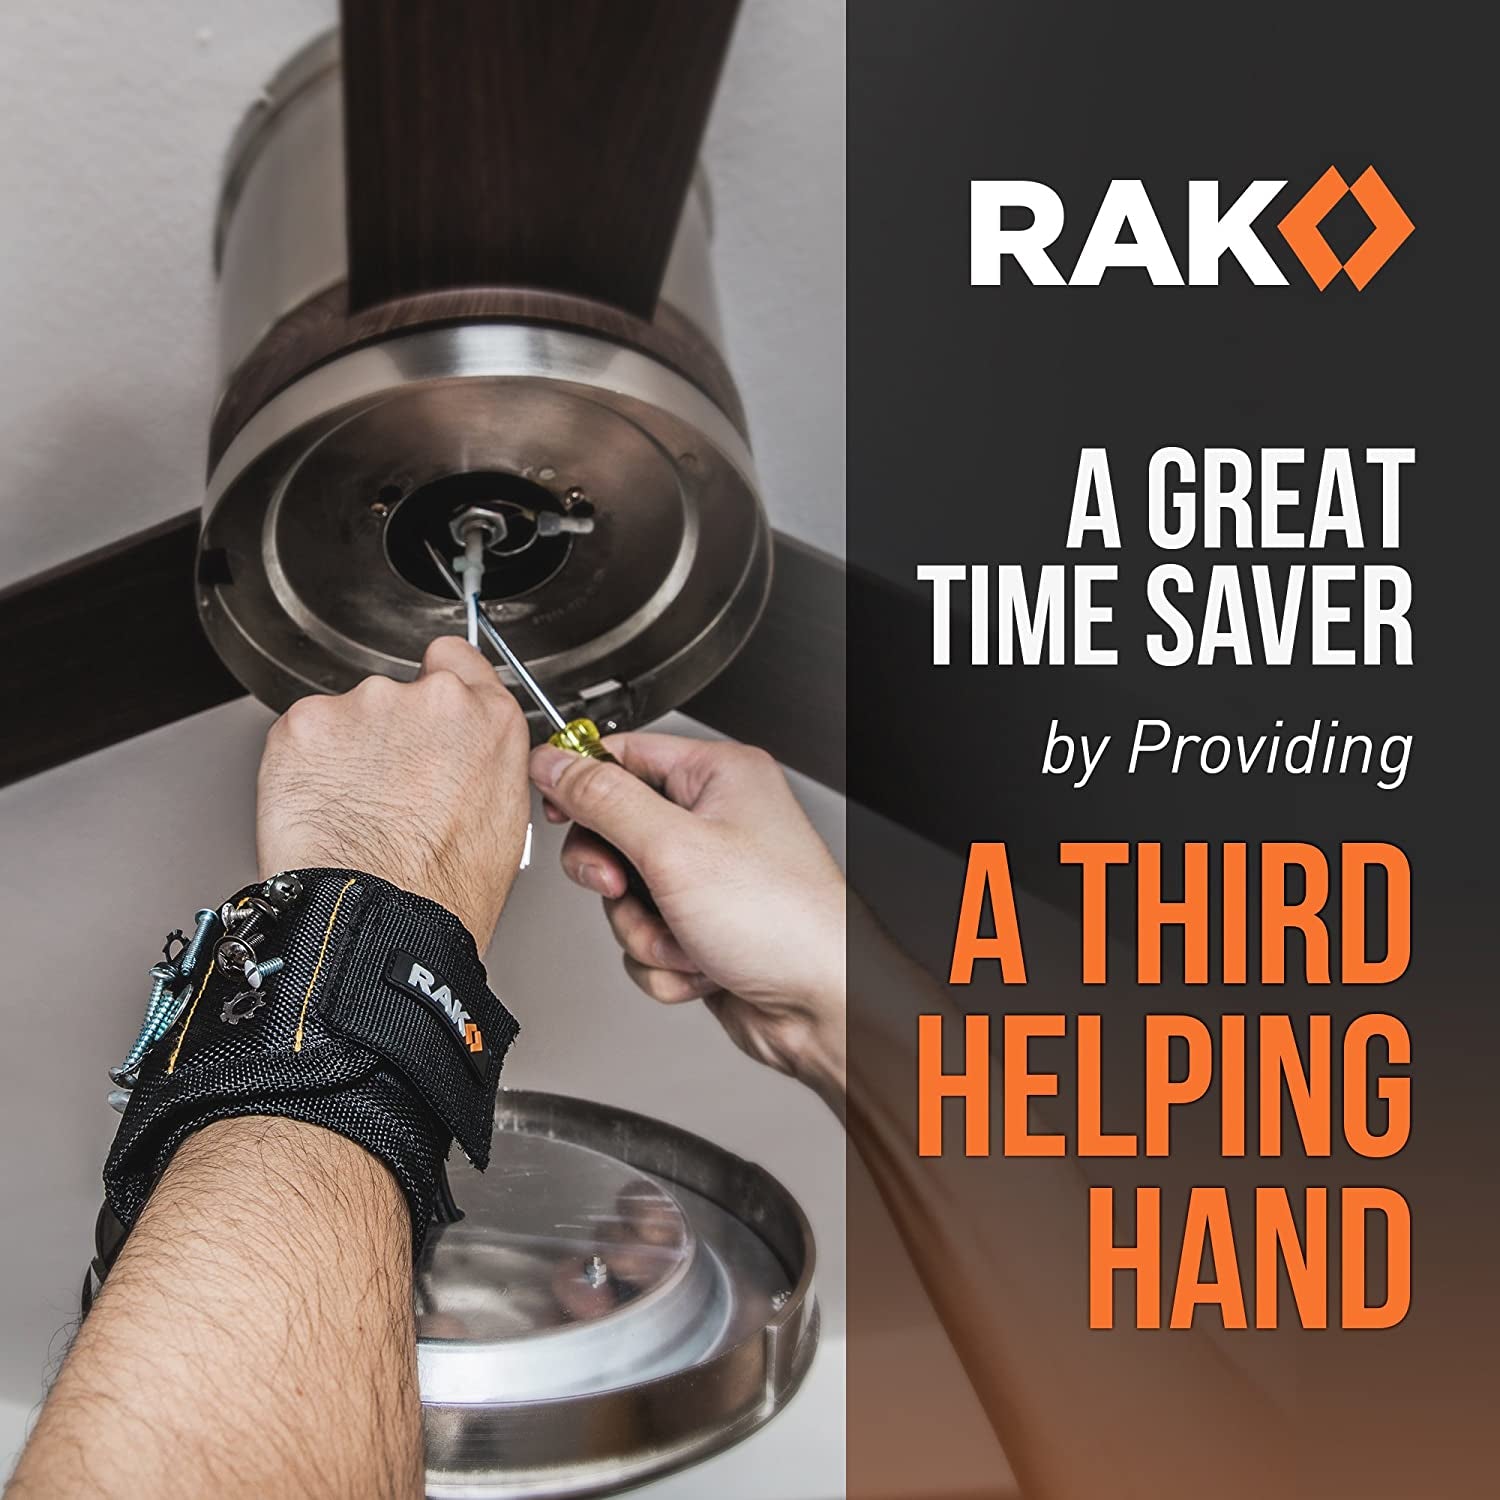 RAK Magnetic Wristband for Holding Screws, Nails and Drill Bits - Birthday Gifts for Men - Made from Premium Ballistic Nylon with Lightweight Powerful Magnets - Cool Gadget Gifts for Men